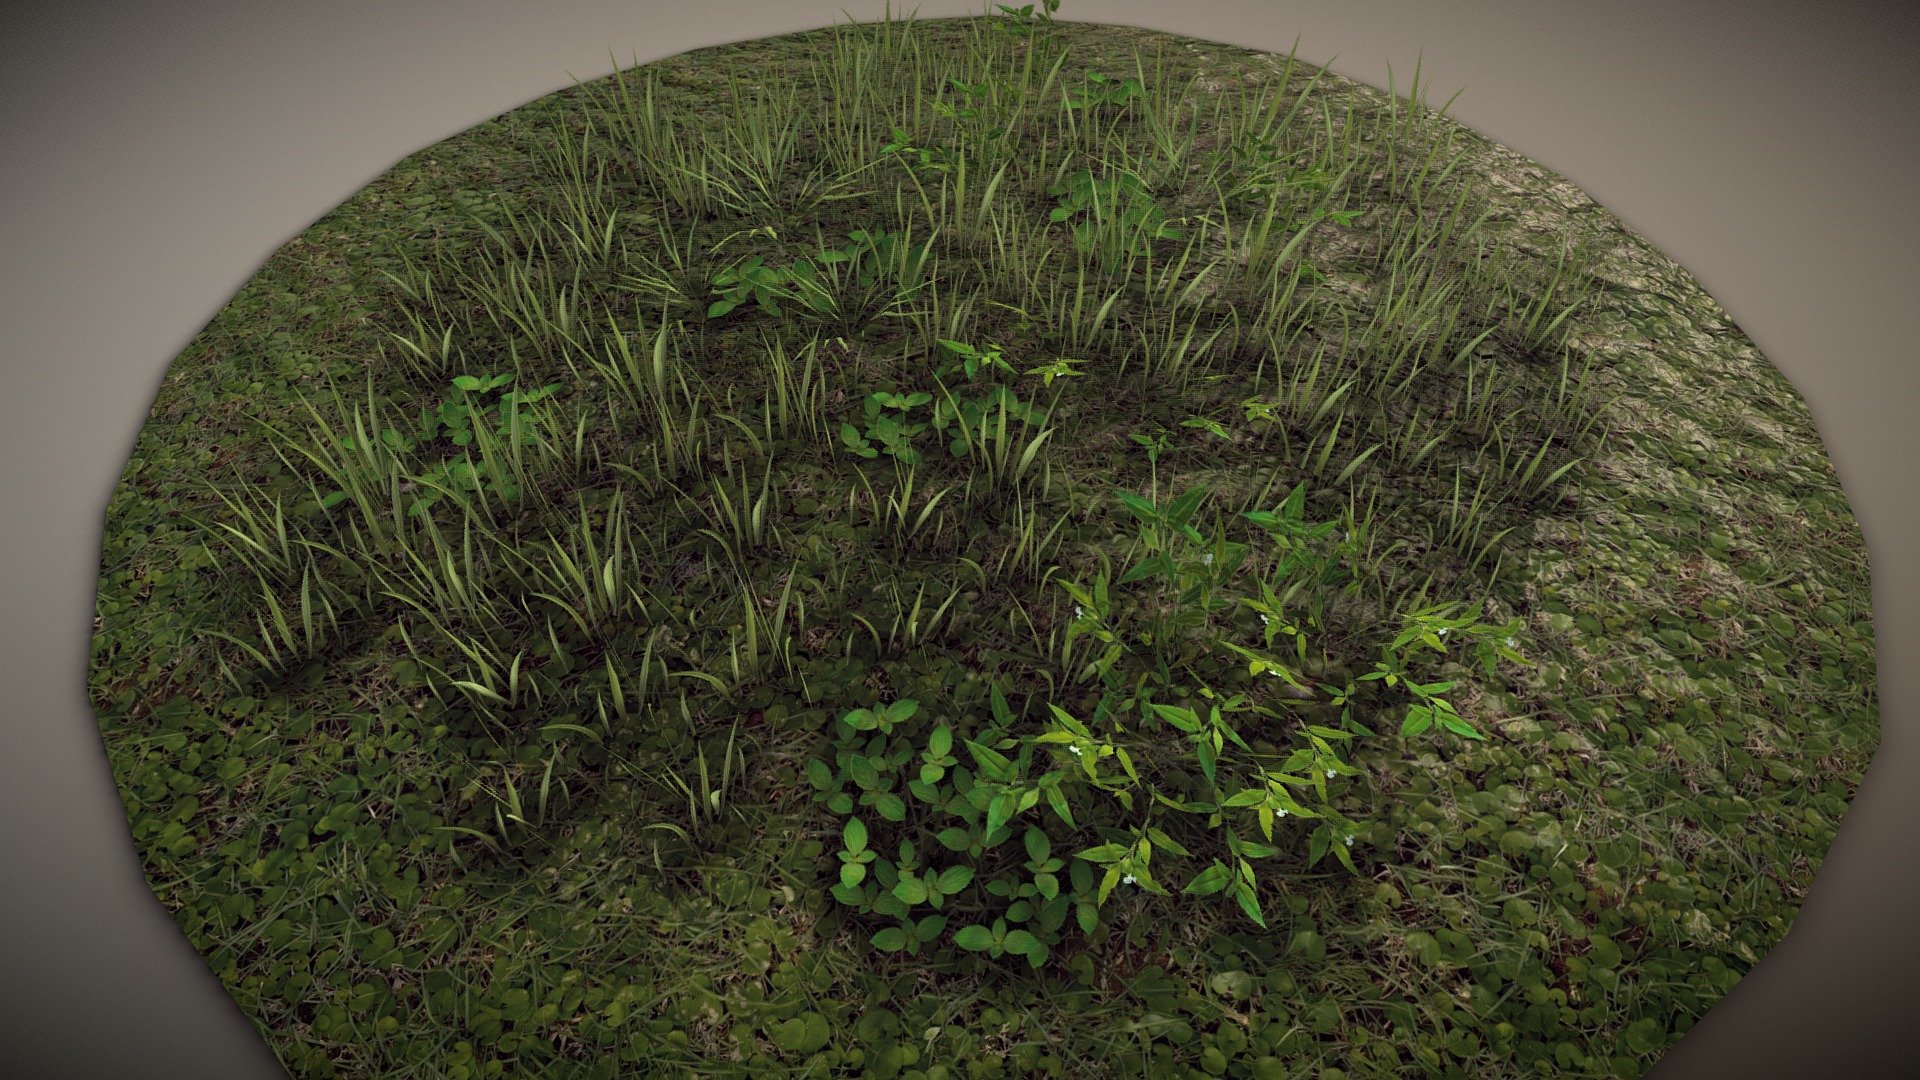 Ground Foliage texture with sample models.

Details:

Maps are 4K resolution (.tif) with alpha channel ready to use in Unity or more engines.

One PBR material

Maps Sample:  https://imgur.com/bTzwnrj

Here an example of this grass rendered in Unity, image with the caption &ldquo;Tall Grass